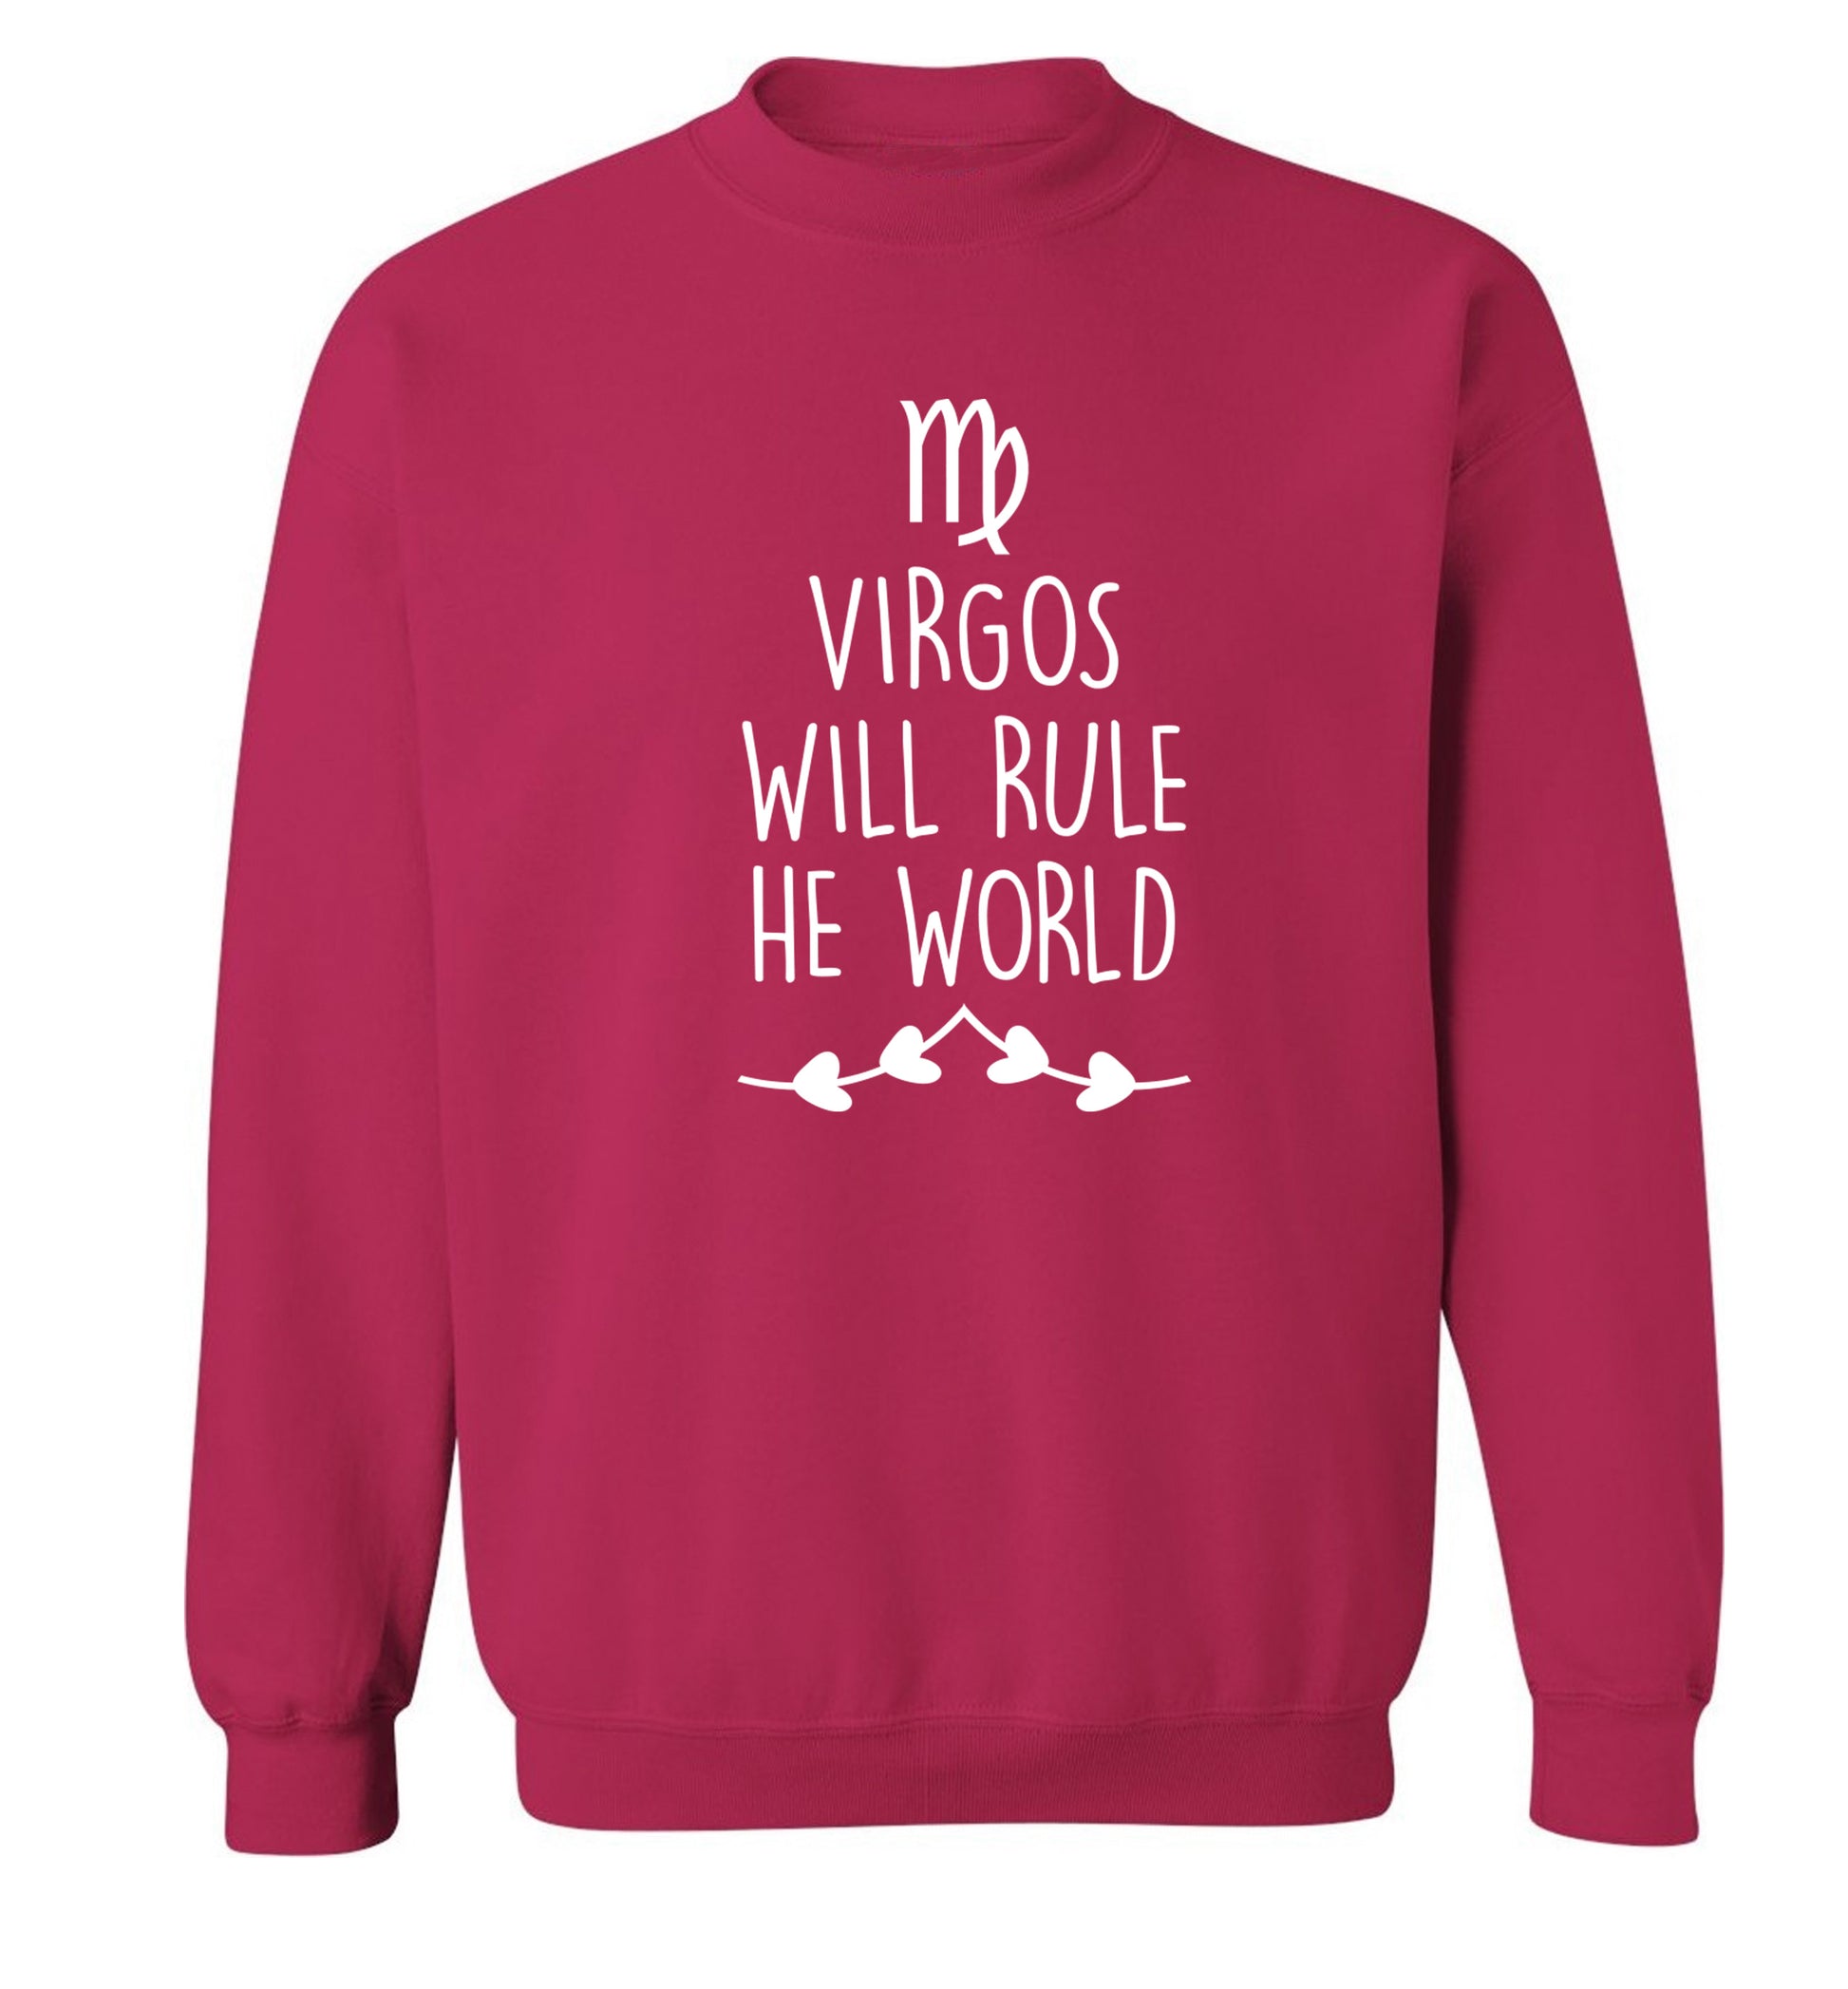 Virgos will rule the world Adult's unisex pink Sweater 2XL